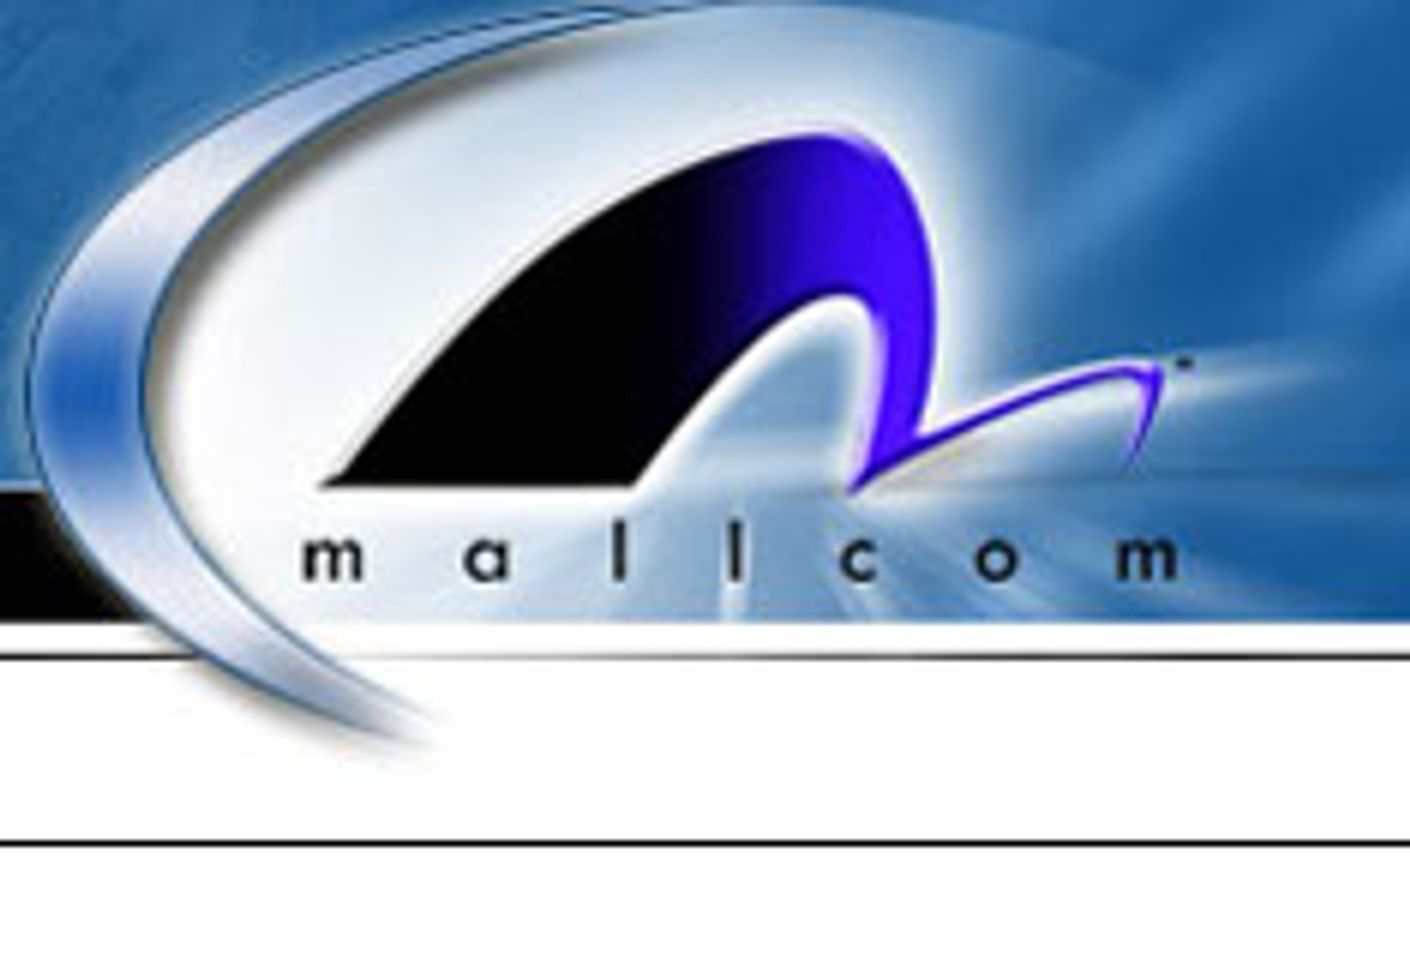 MALLcom Redesigns Site, New Features On the Way - AVN